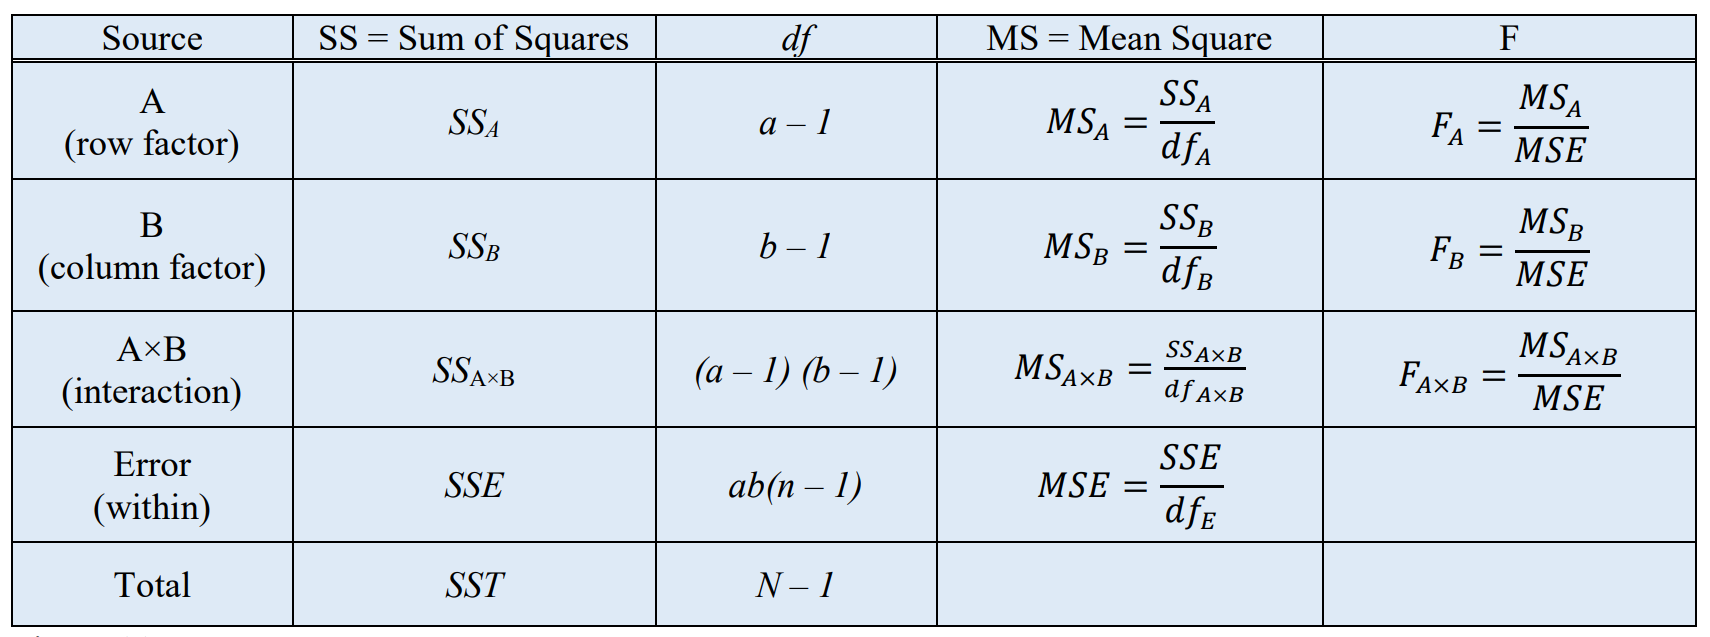 Template for a two-way ANOVA table, showing all equations.